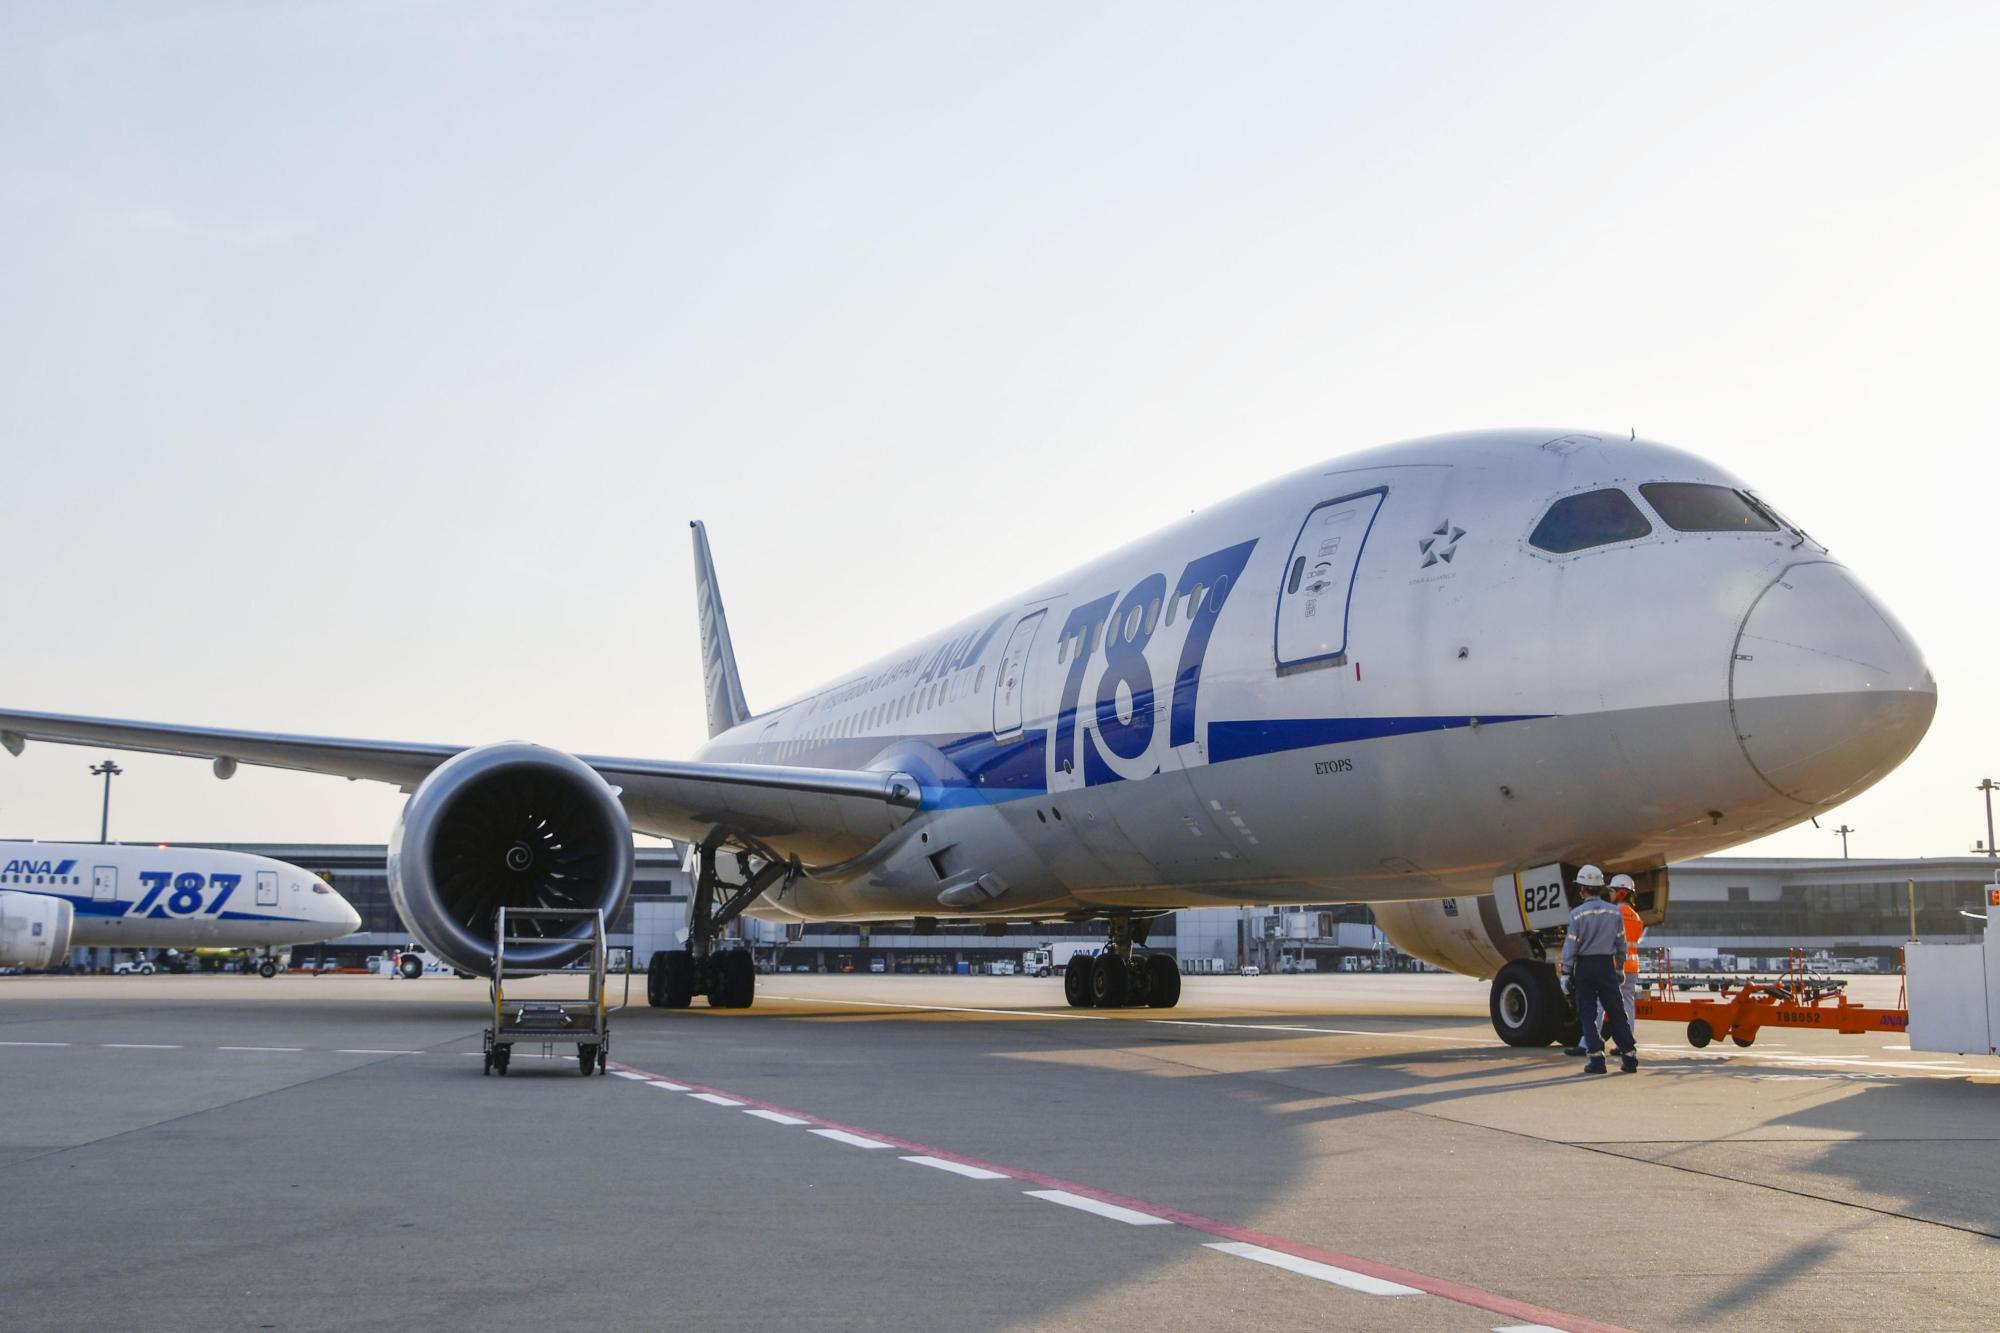 All Nippon Airways is now considering launching its first direct flights to Russia as early as 2020 as it expects economic cooperation between the two countries will expand further. | KYODO